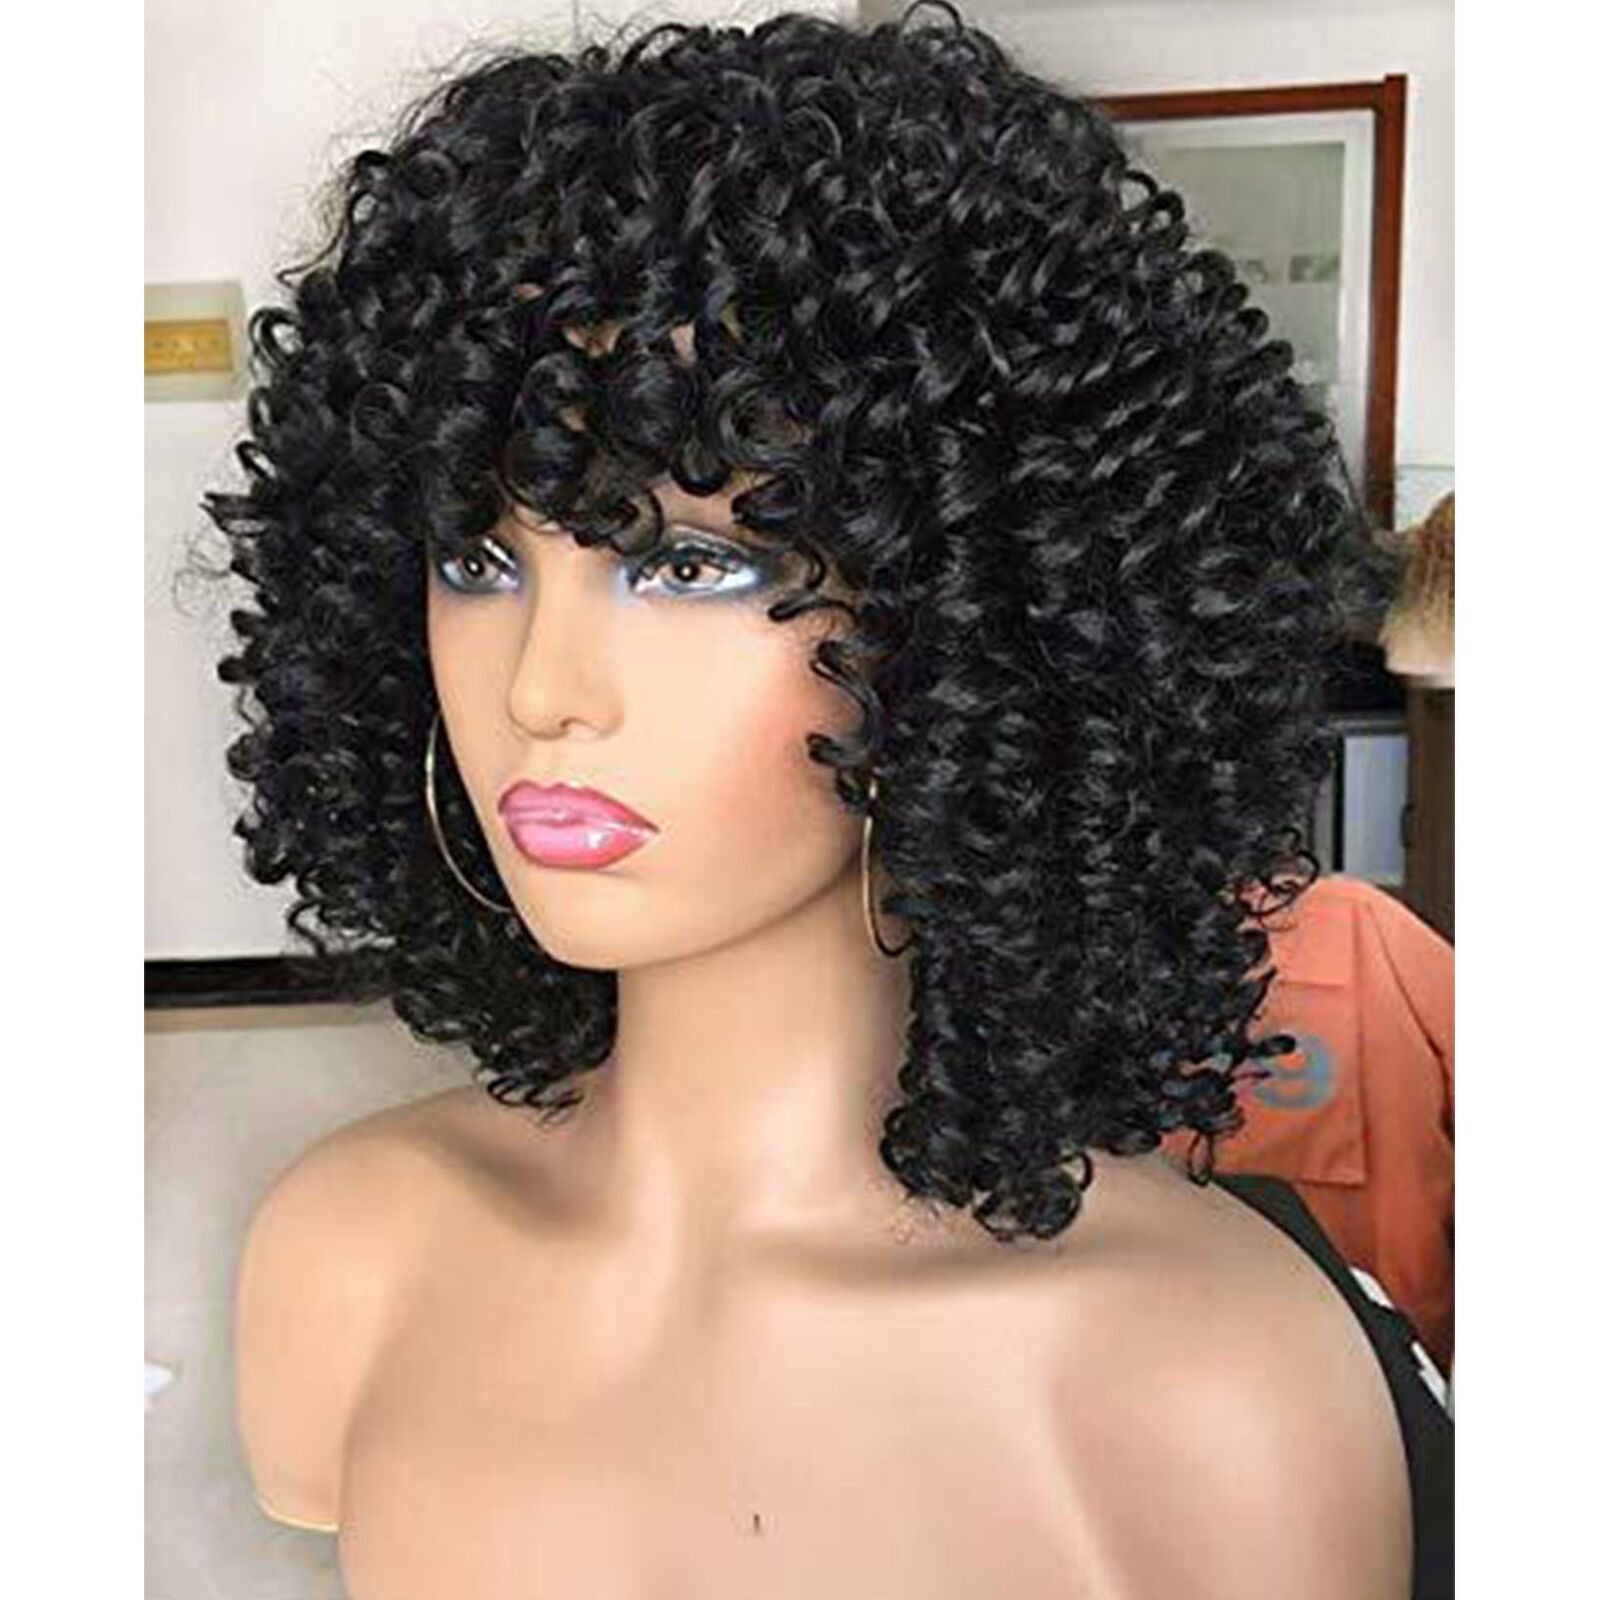 Women Curly Afro Wig with Bangs Short Kinky Curly Wigs for Black Women black